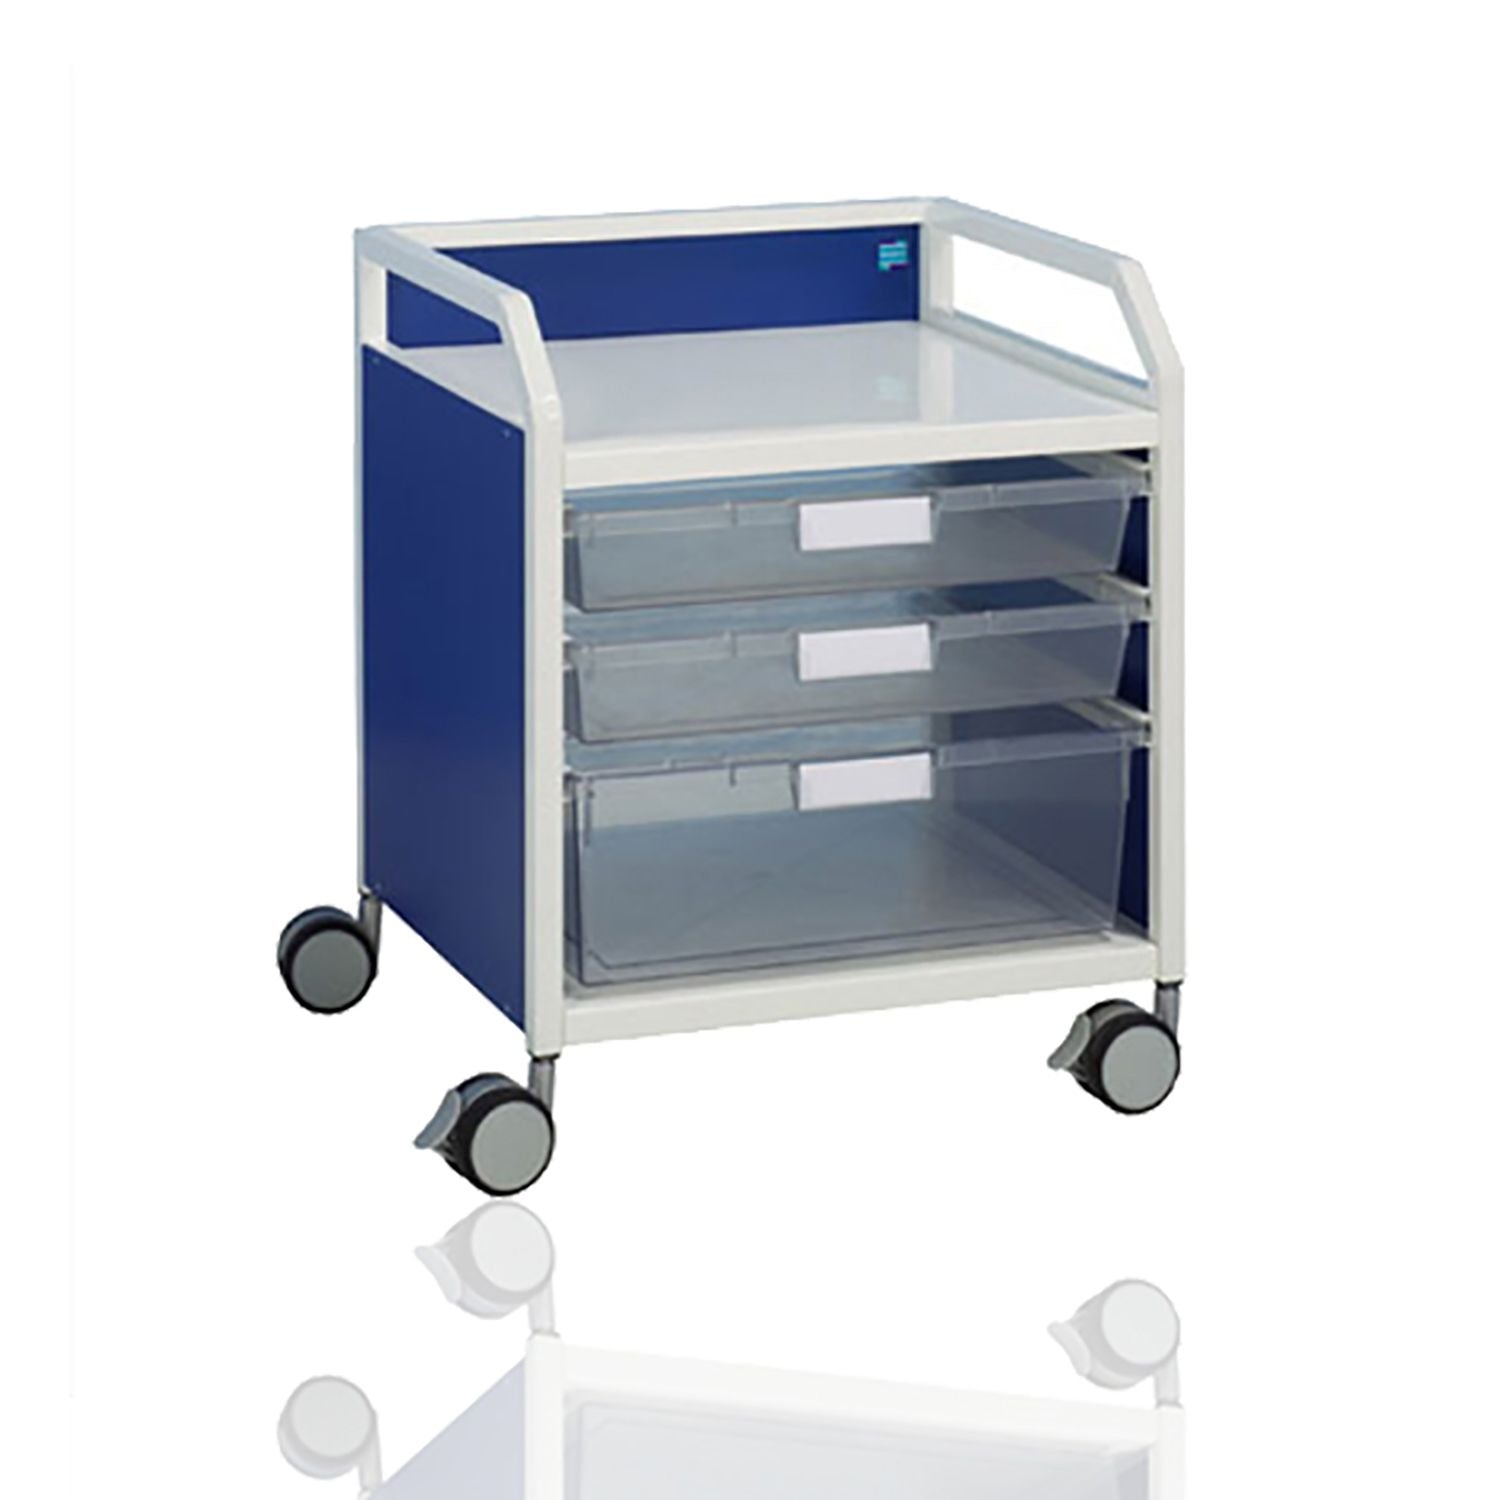 Howarth 3 Trolley with Aston Panels 615 x 520 x 445mm (HxWxD)